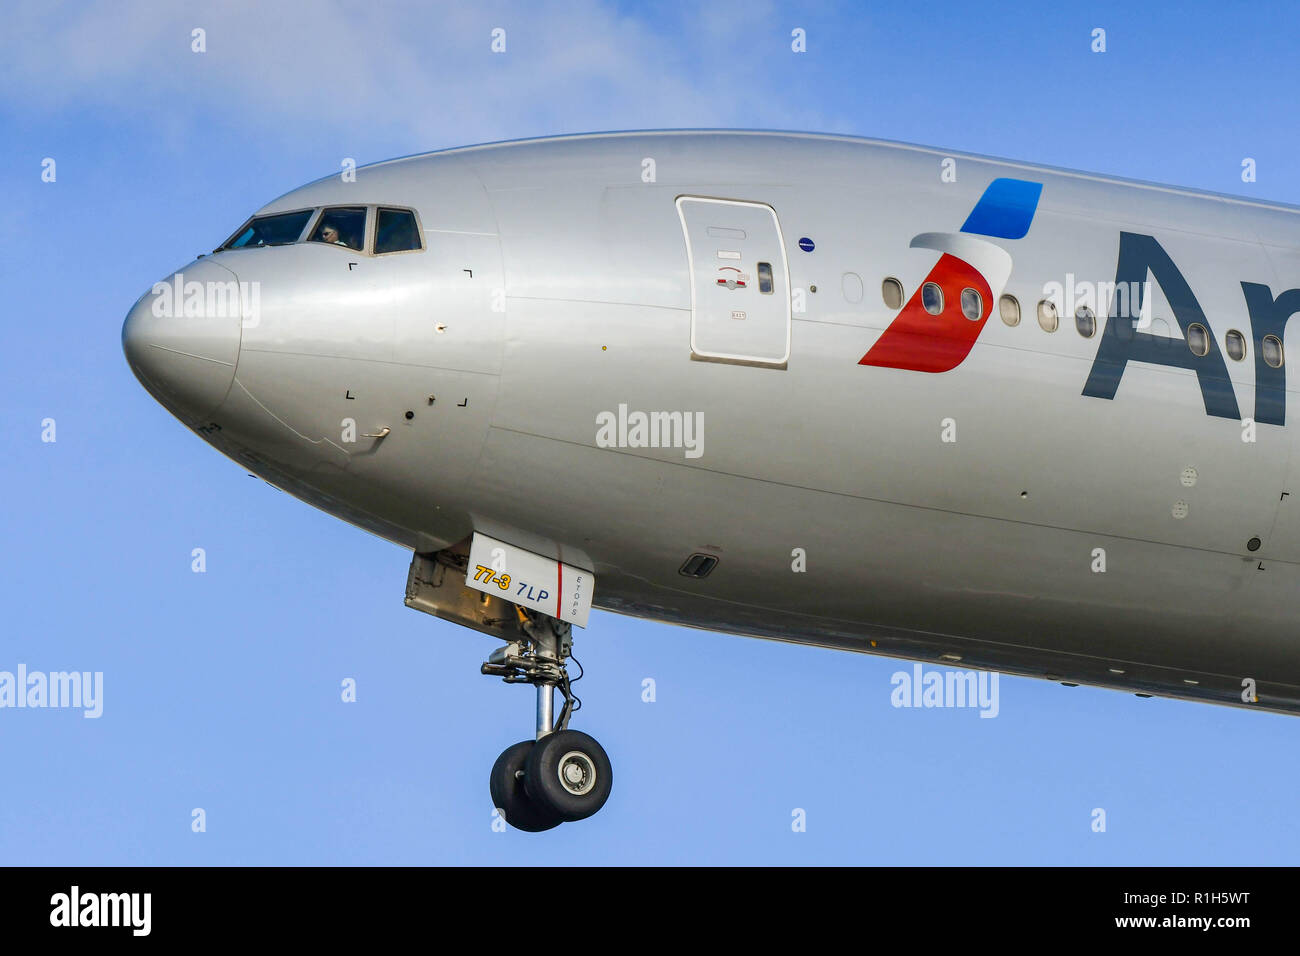 LONDON, ENGLAND - NOVEMBER 2018: Close up of the nose of an American Airlines Boeing 777 long haul airliner landing at London Heathrow Airport. Stock Photo